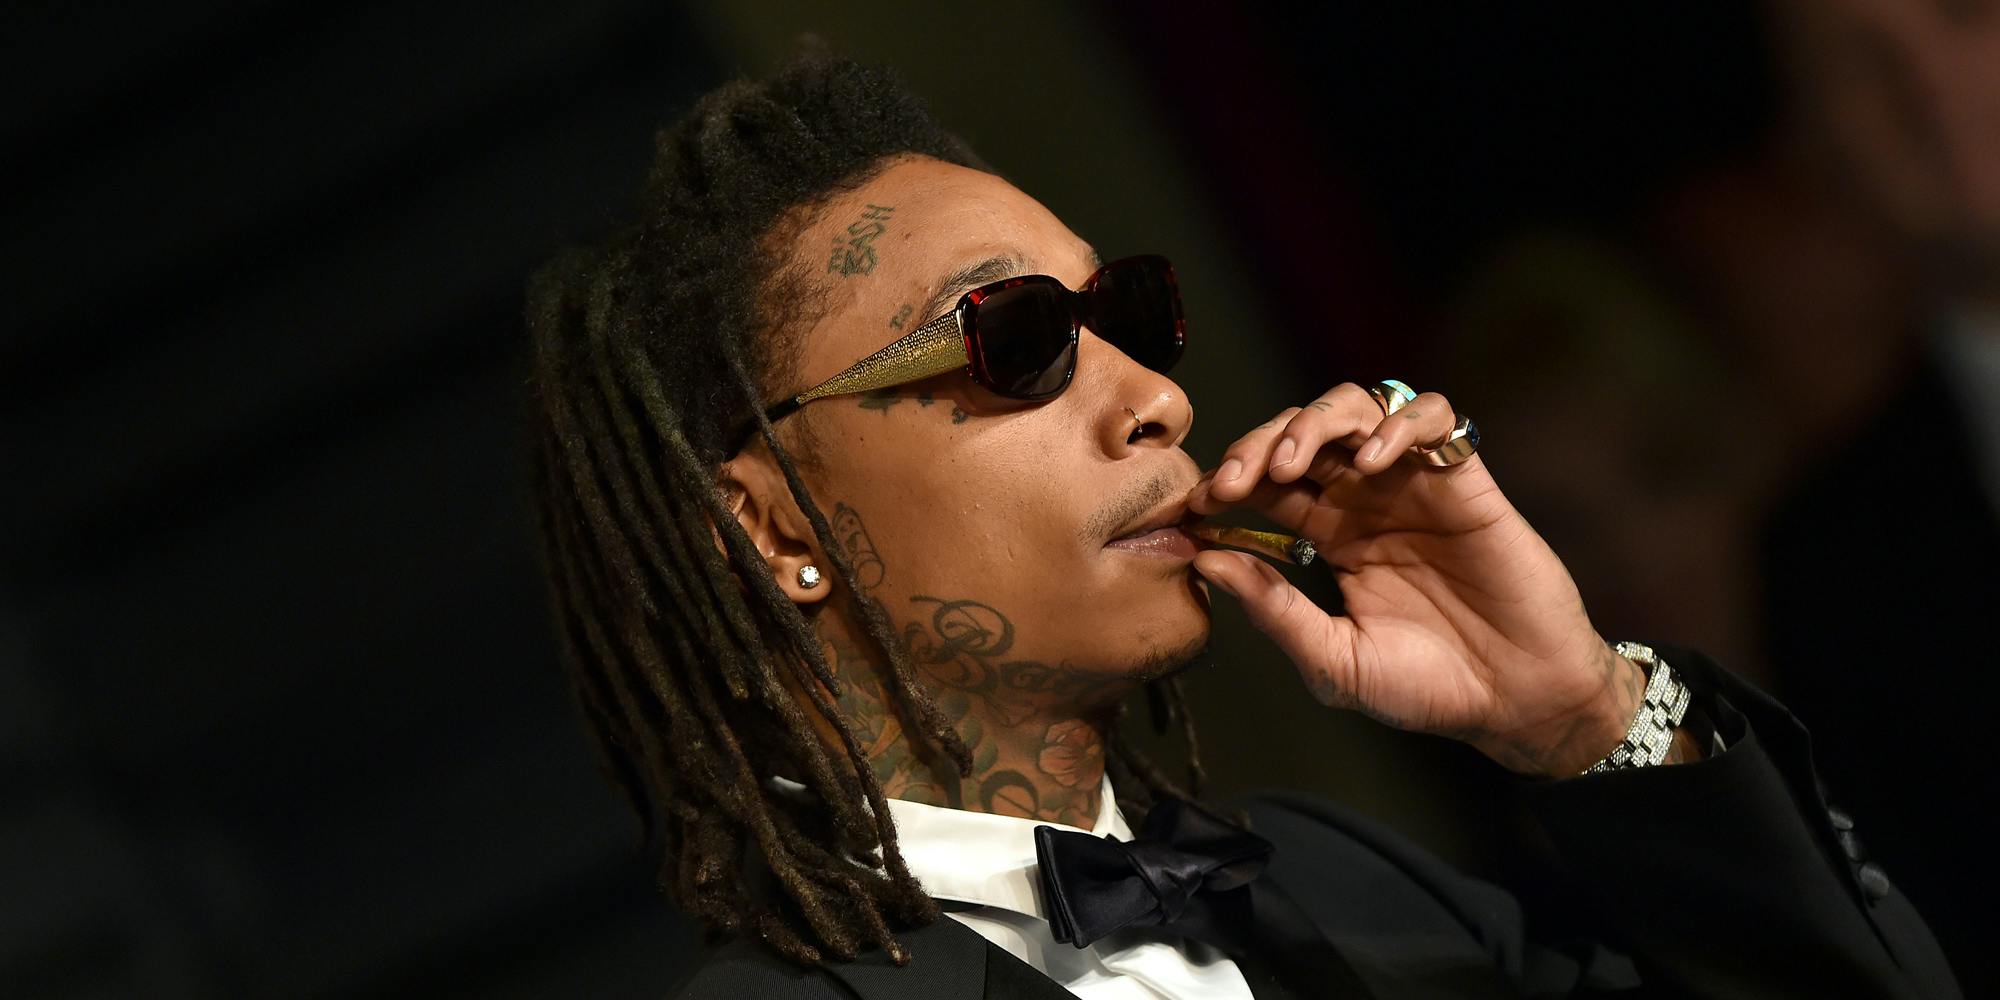 2018 Vanity Fair Oscar Party BEVERLY HILLS, CA - MARCH 04: Rapper Wiz Khalifa attends the 2018 Vanity Fair Oscar Party hosted by Radhika Jones at Wallis Annenberg Center for the Performing Arts on March 4, 2018 in Beverly Hills, California. (Photo by Axelle/Bauer-Griffin/FilmMagic)